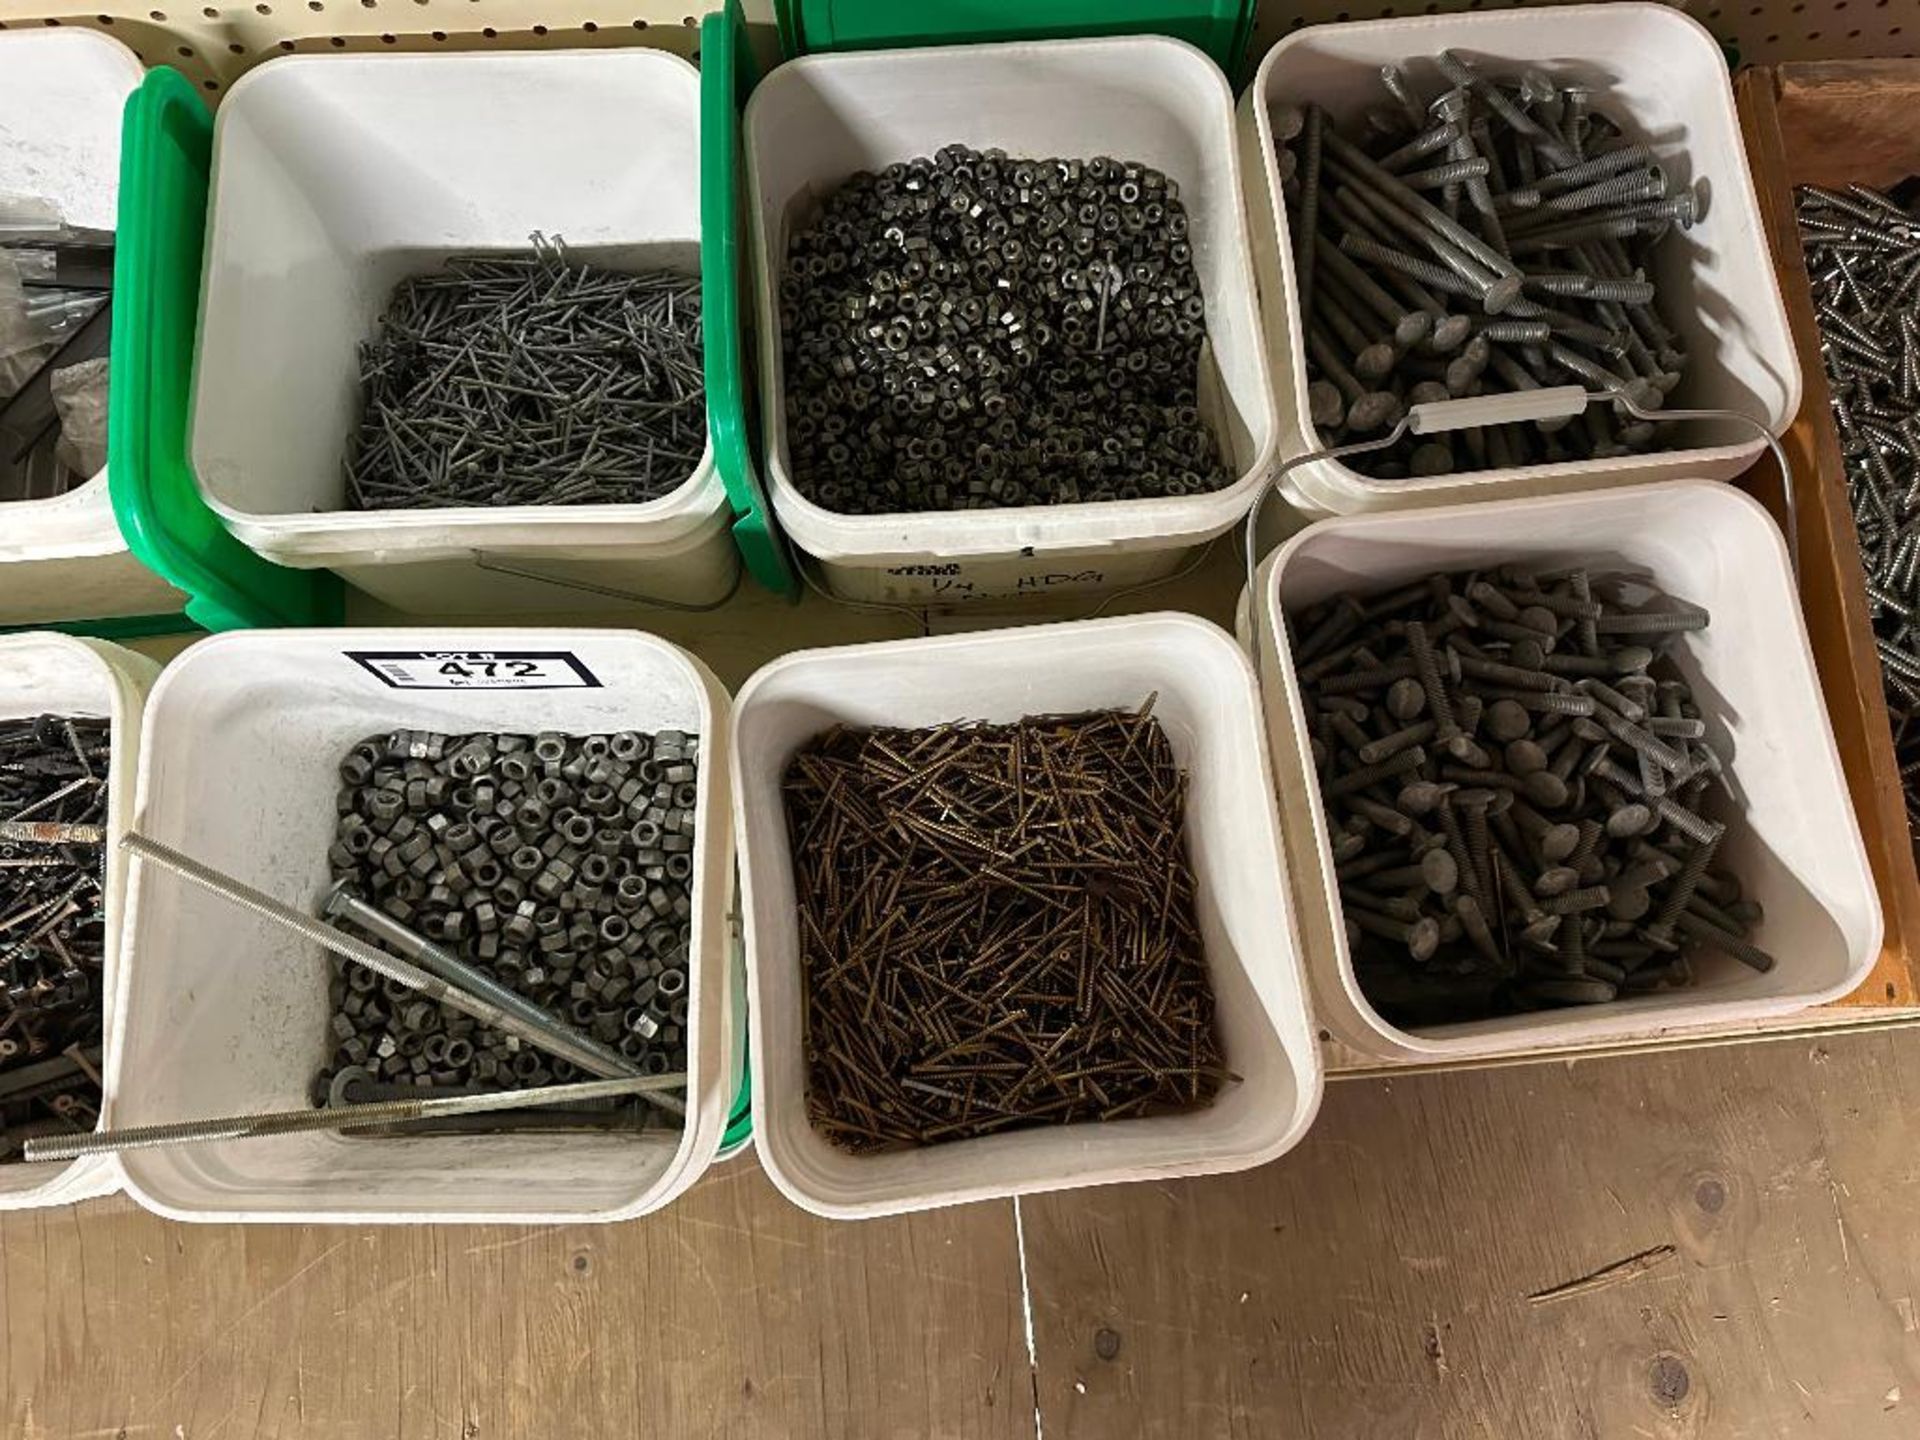 Lot of Asst. Fasteners including Screws, Nuts, Bolts, Nails, etc. - Image 4 of 5